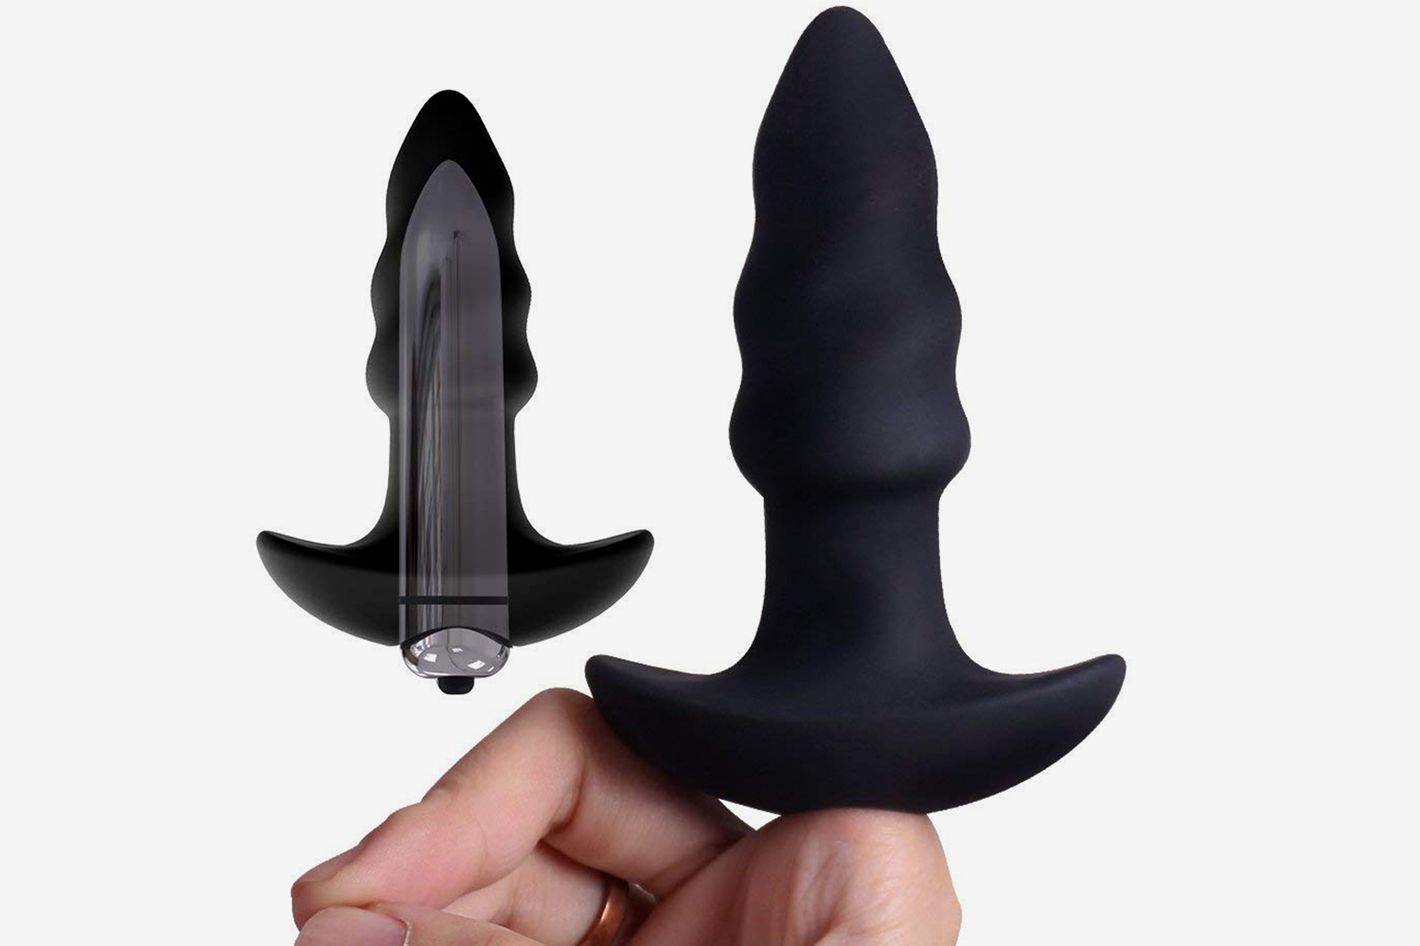 Overly large adult toys